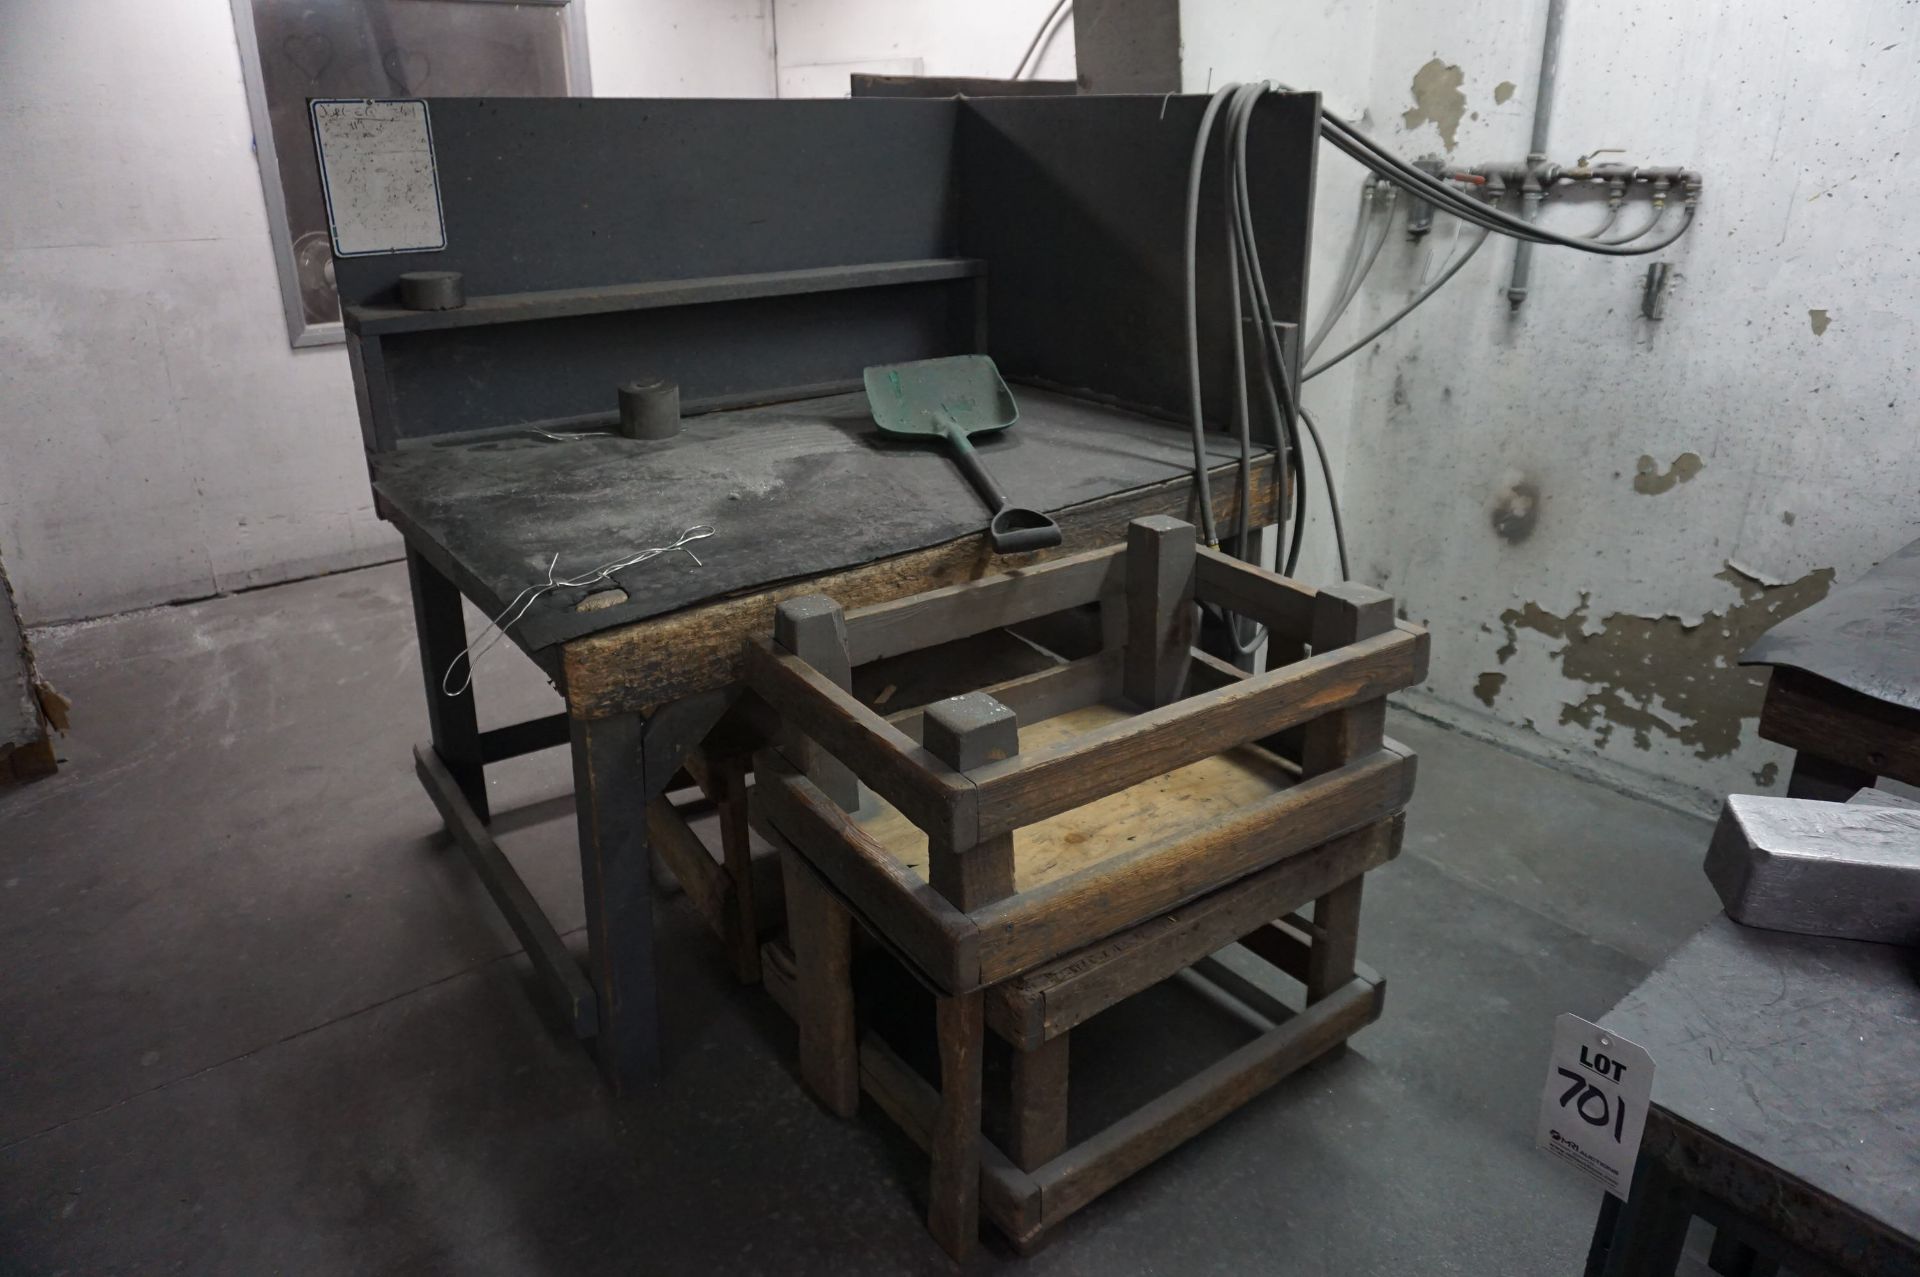 GRINDING ROOM LOT TO INCLUDE: (1) STEEL WORK BENCH, WOOD TOP, (2) WOOD WORKSTATIONS, ANTI FATIGUE - Image 4 of 4